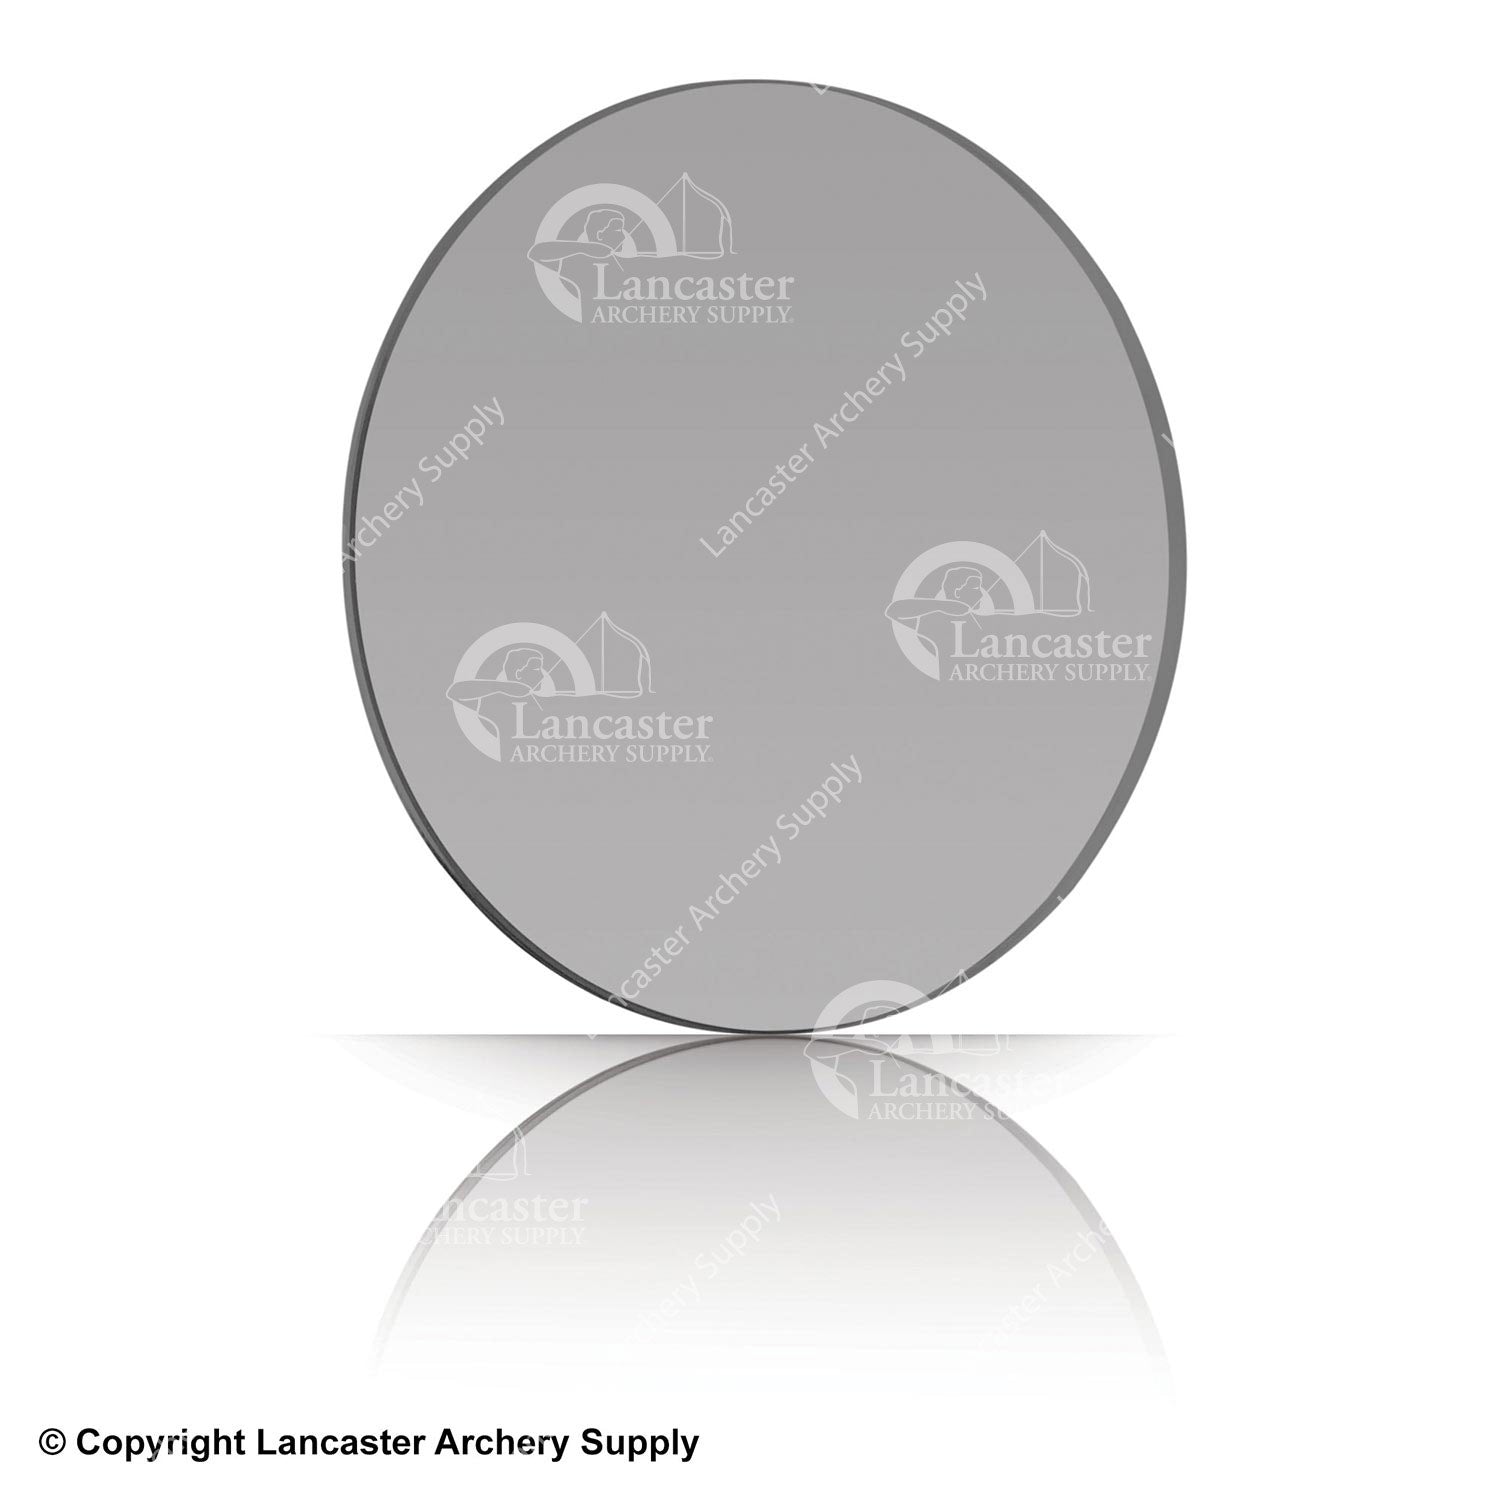 Clear Targets Filter Lens (0x)